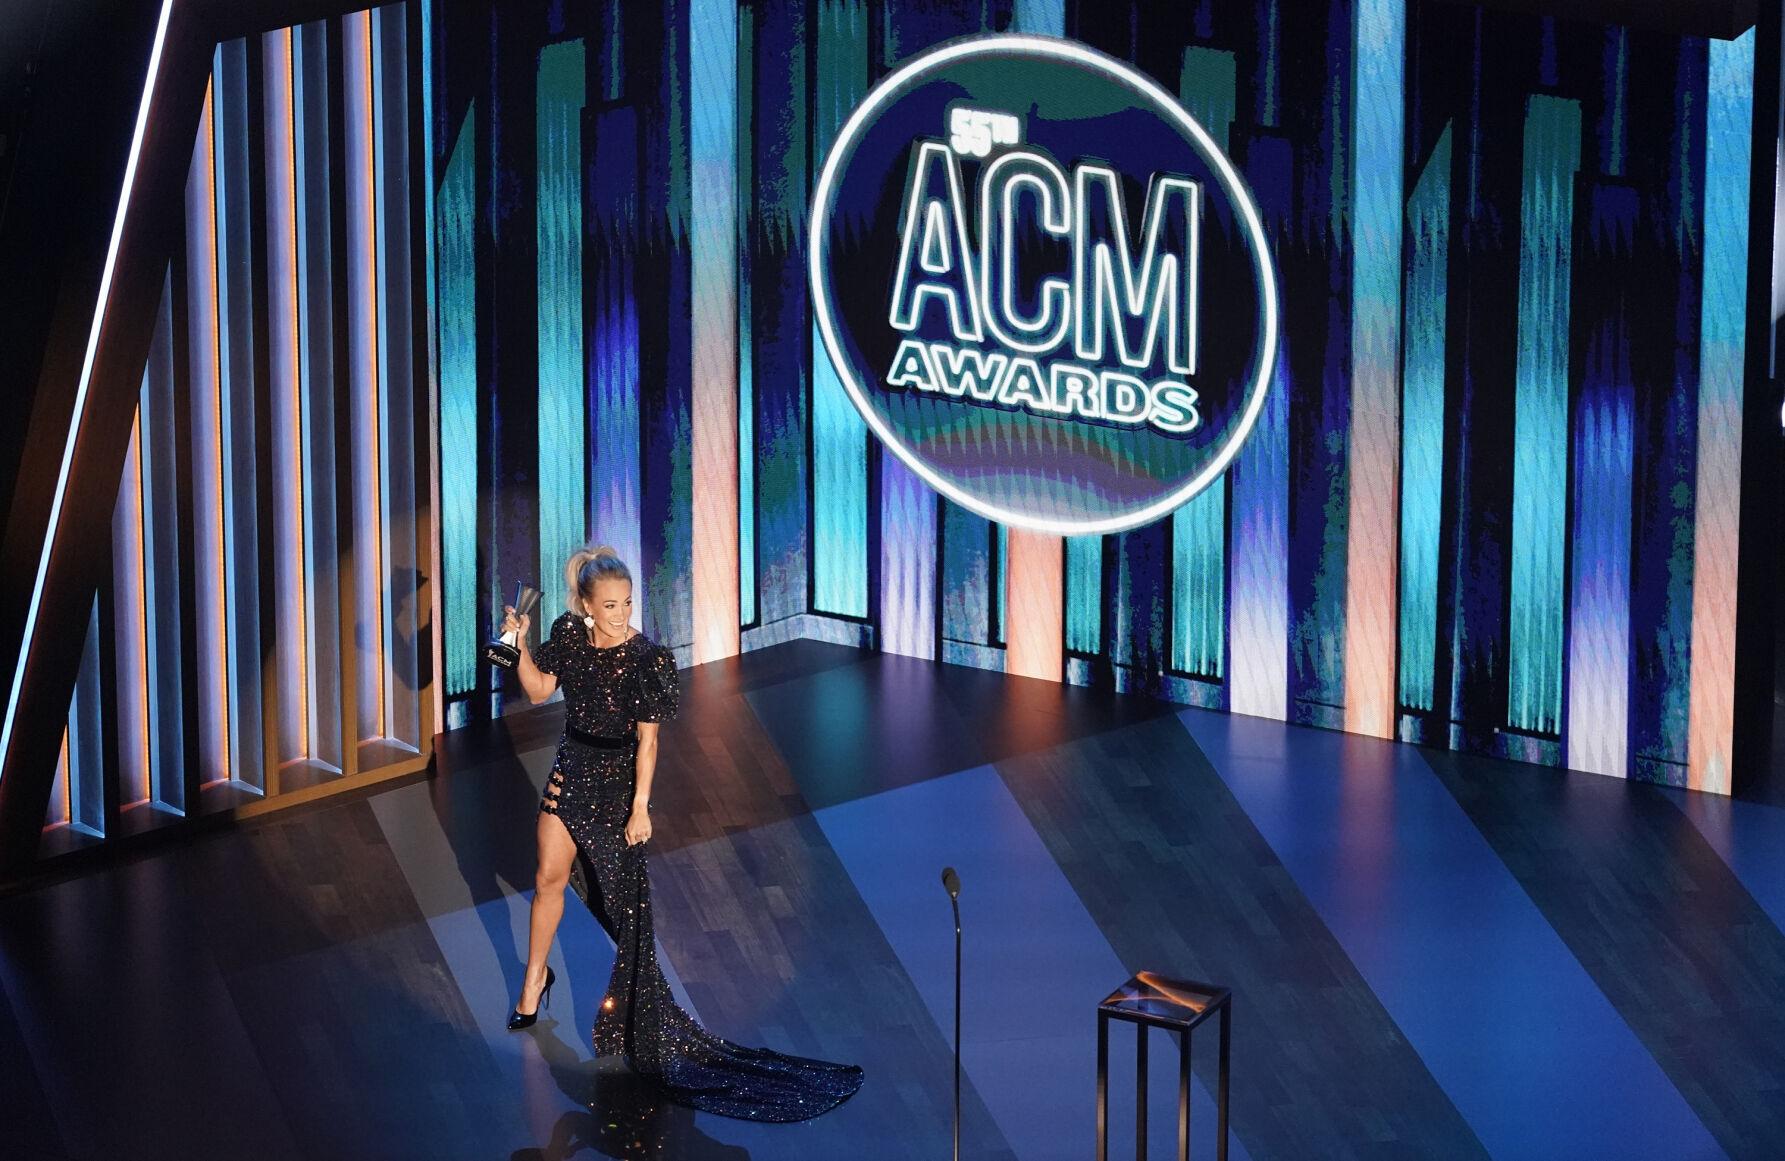 ACM Awards 2020 Check out the list of winners and scenes from the show